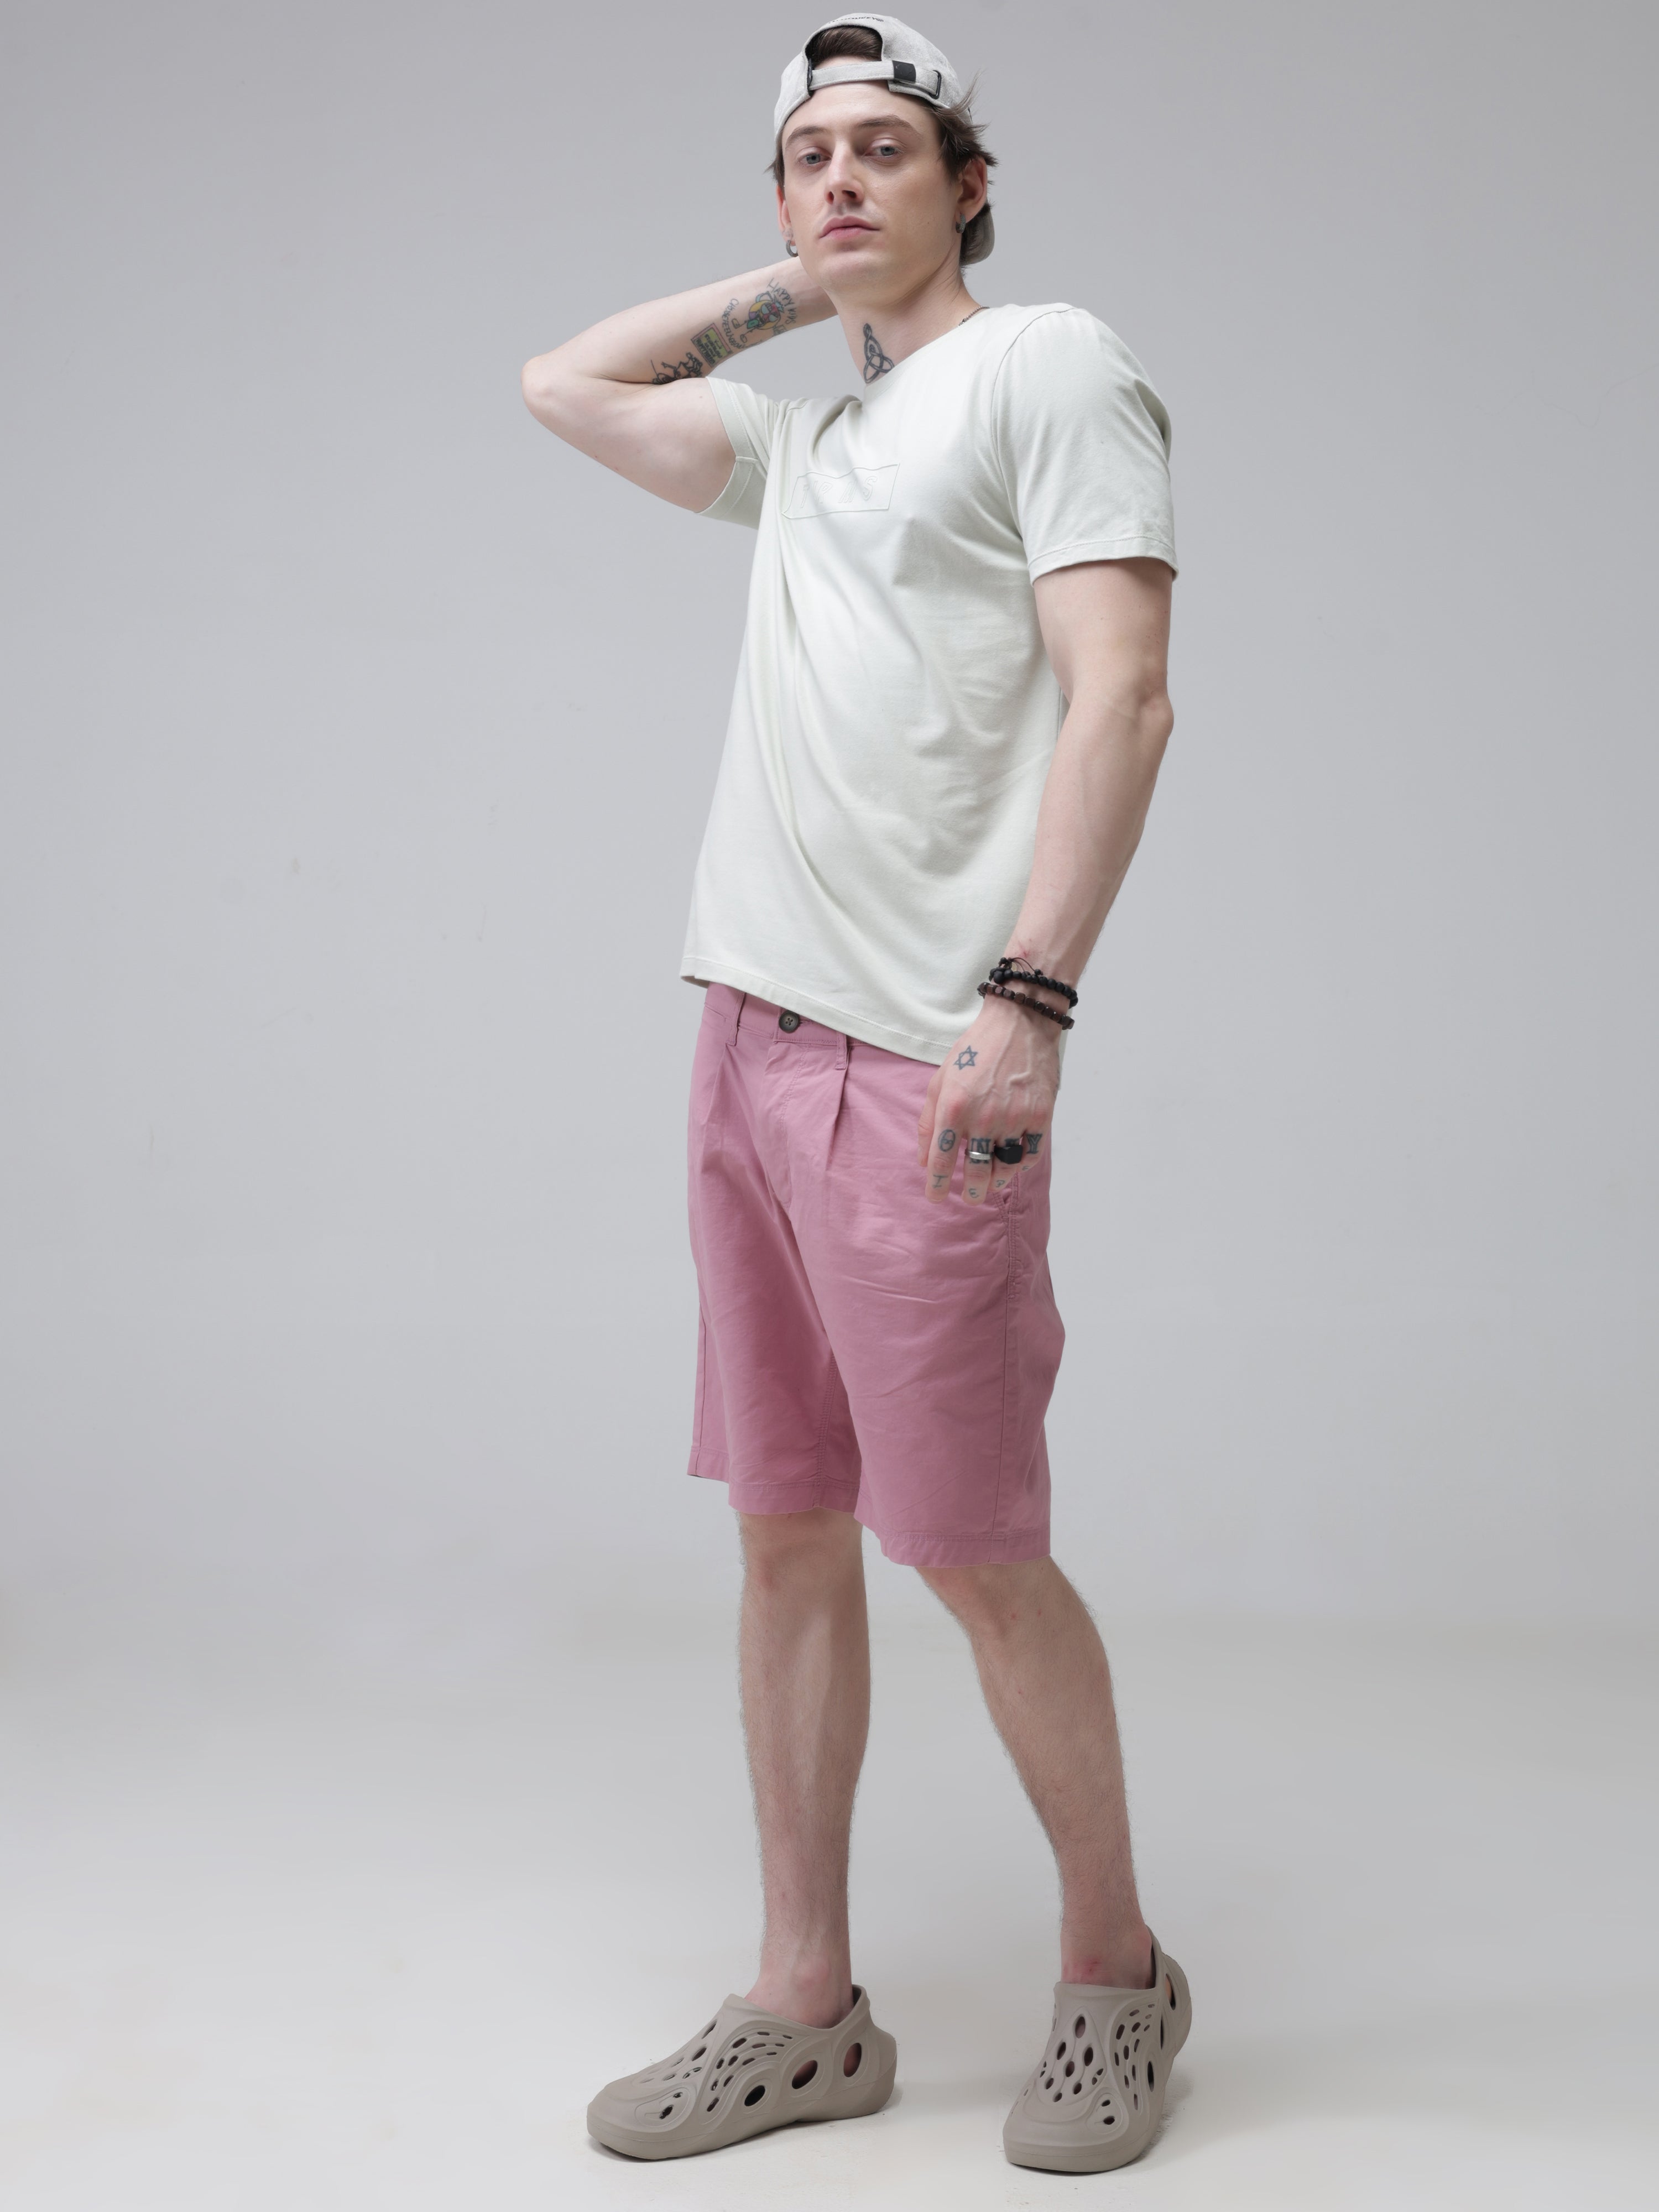 Man wearing a white round-neck Turms T-shirt and pink shorts with beige shoes, striking a pose